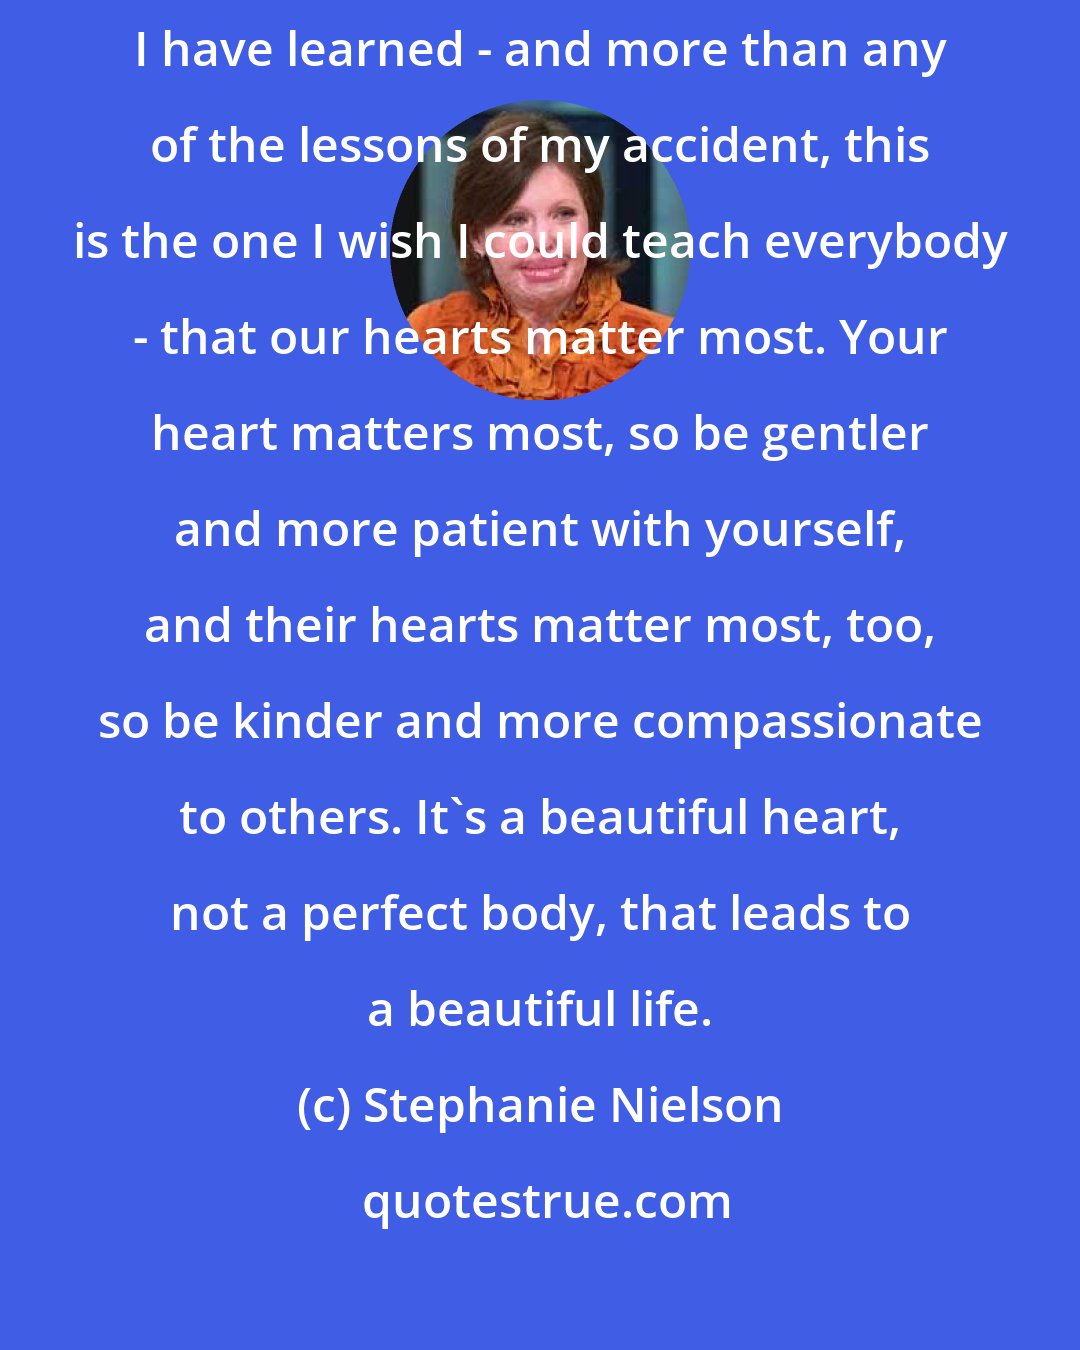 Stephanie Nielson: I have accepted myself in a world that does not accept me, because I have learned - and more than any of the lessons of my accident, this is the one I wish I could teach everybody - that our hearts matter most. Your heart matters most, so be gentler and more patient with yourself, and their hearts matter most, too, so be kinder and more compassionate to others. It's a beautiful heart, not a perfect body, that leads to a beautiful life.